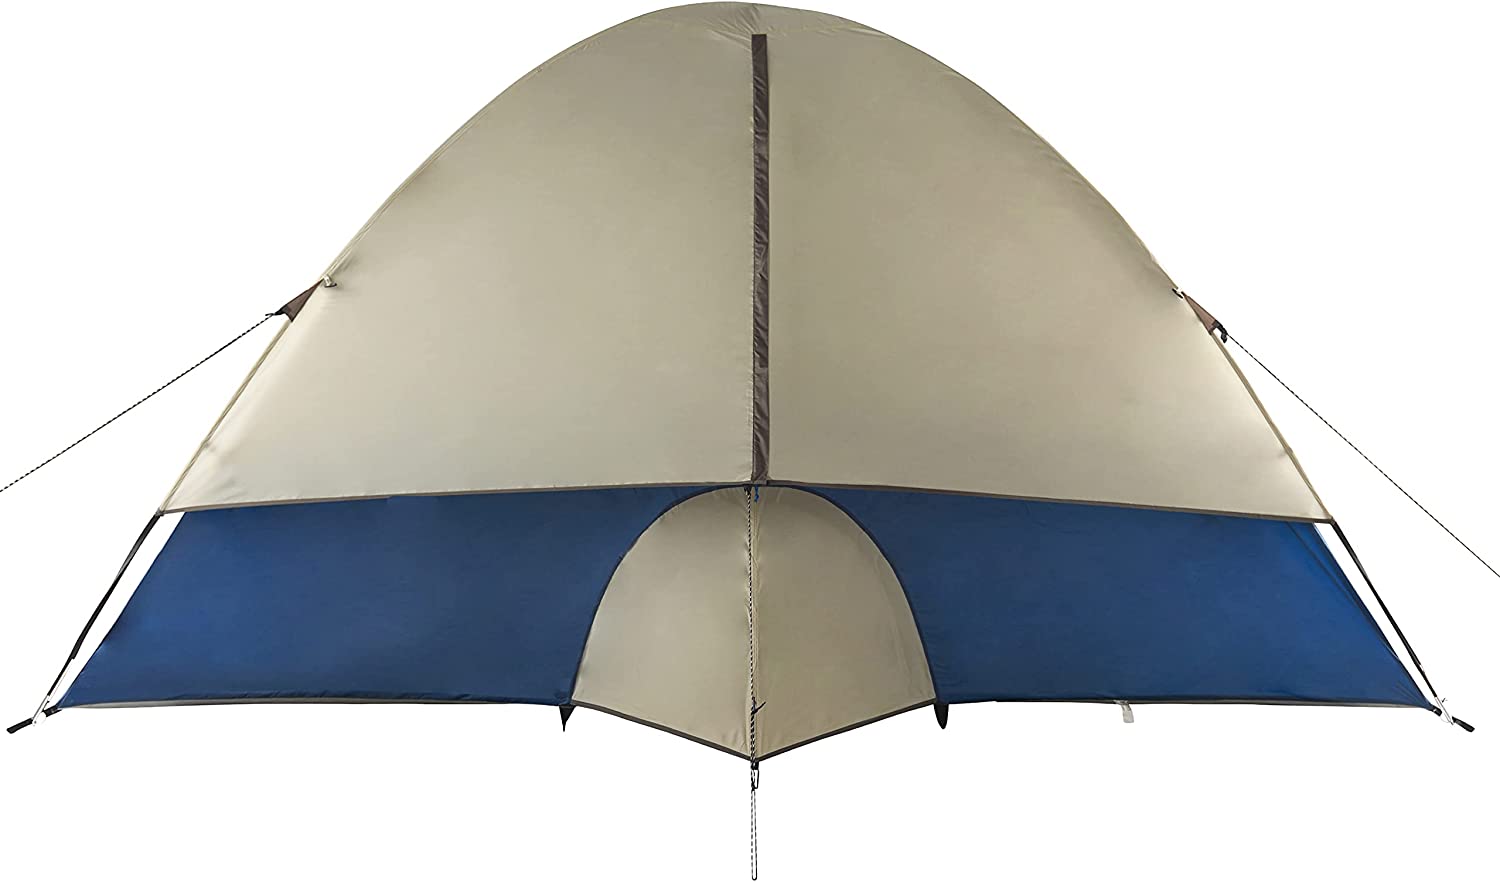 Wenzel Tamarack 6-Person Dome tent's rainfly